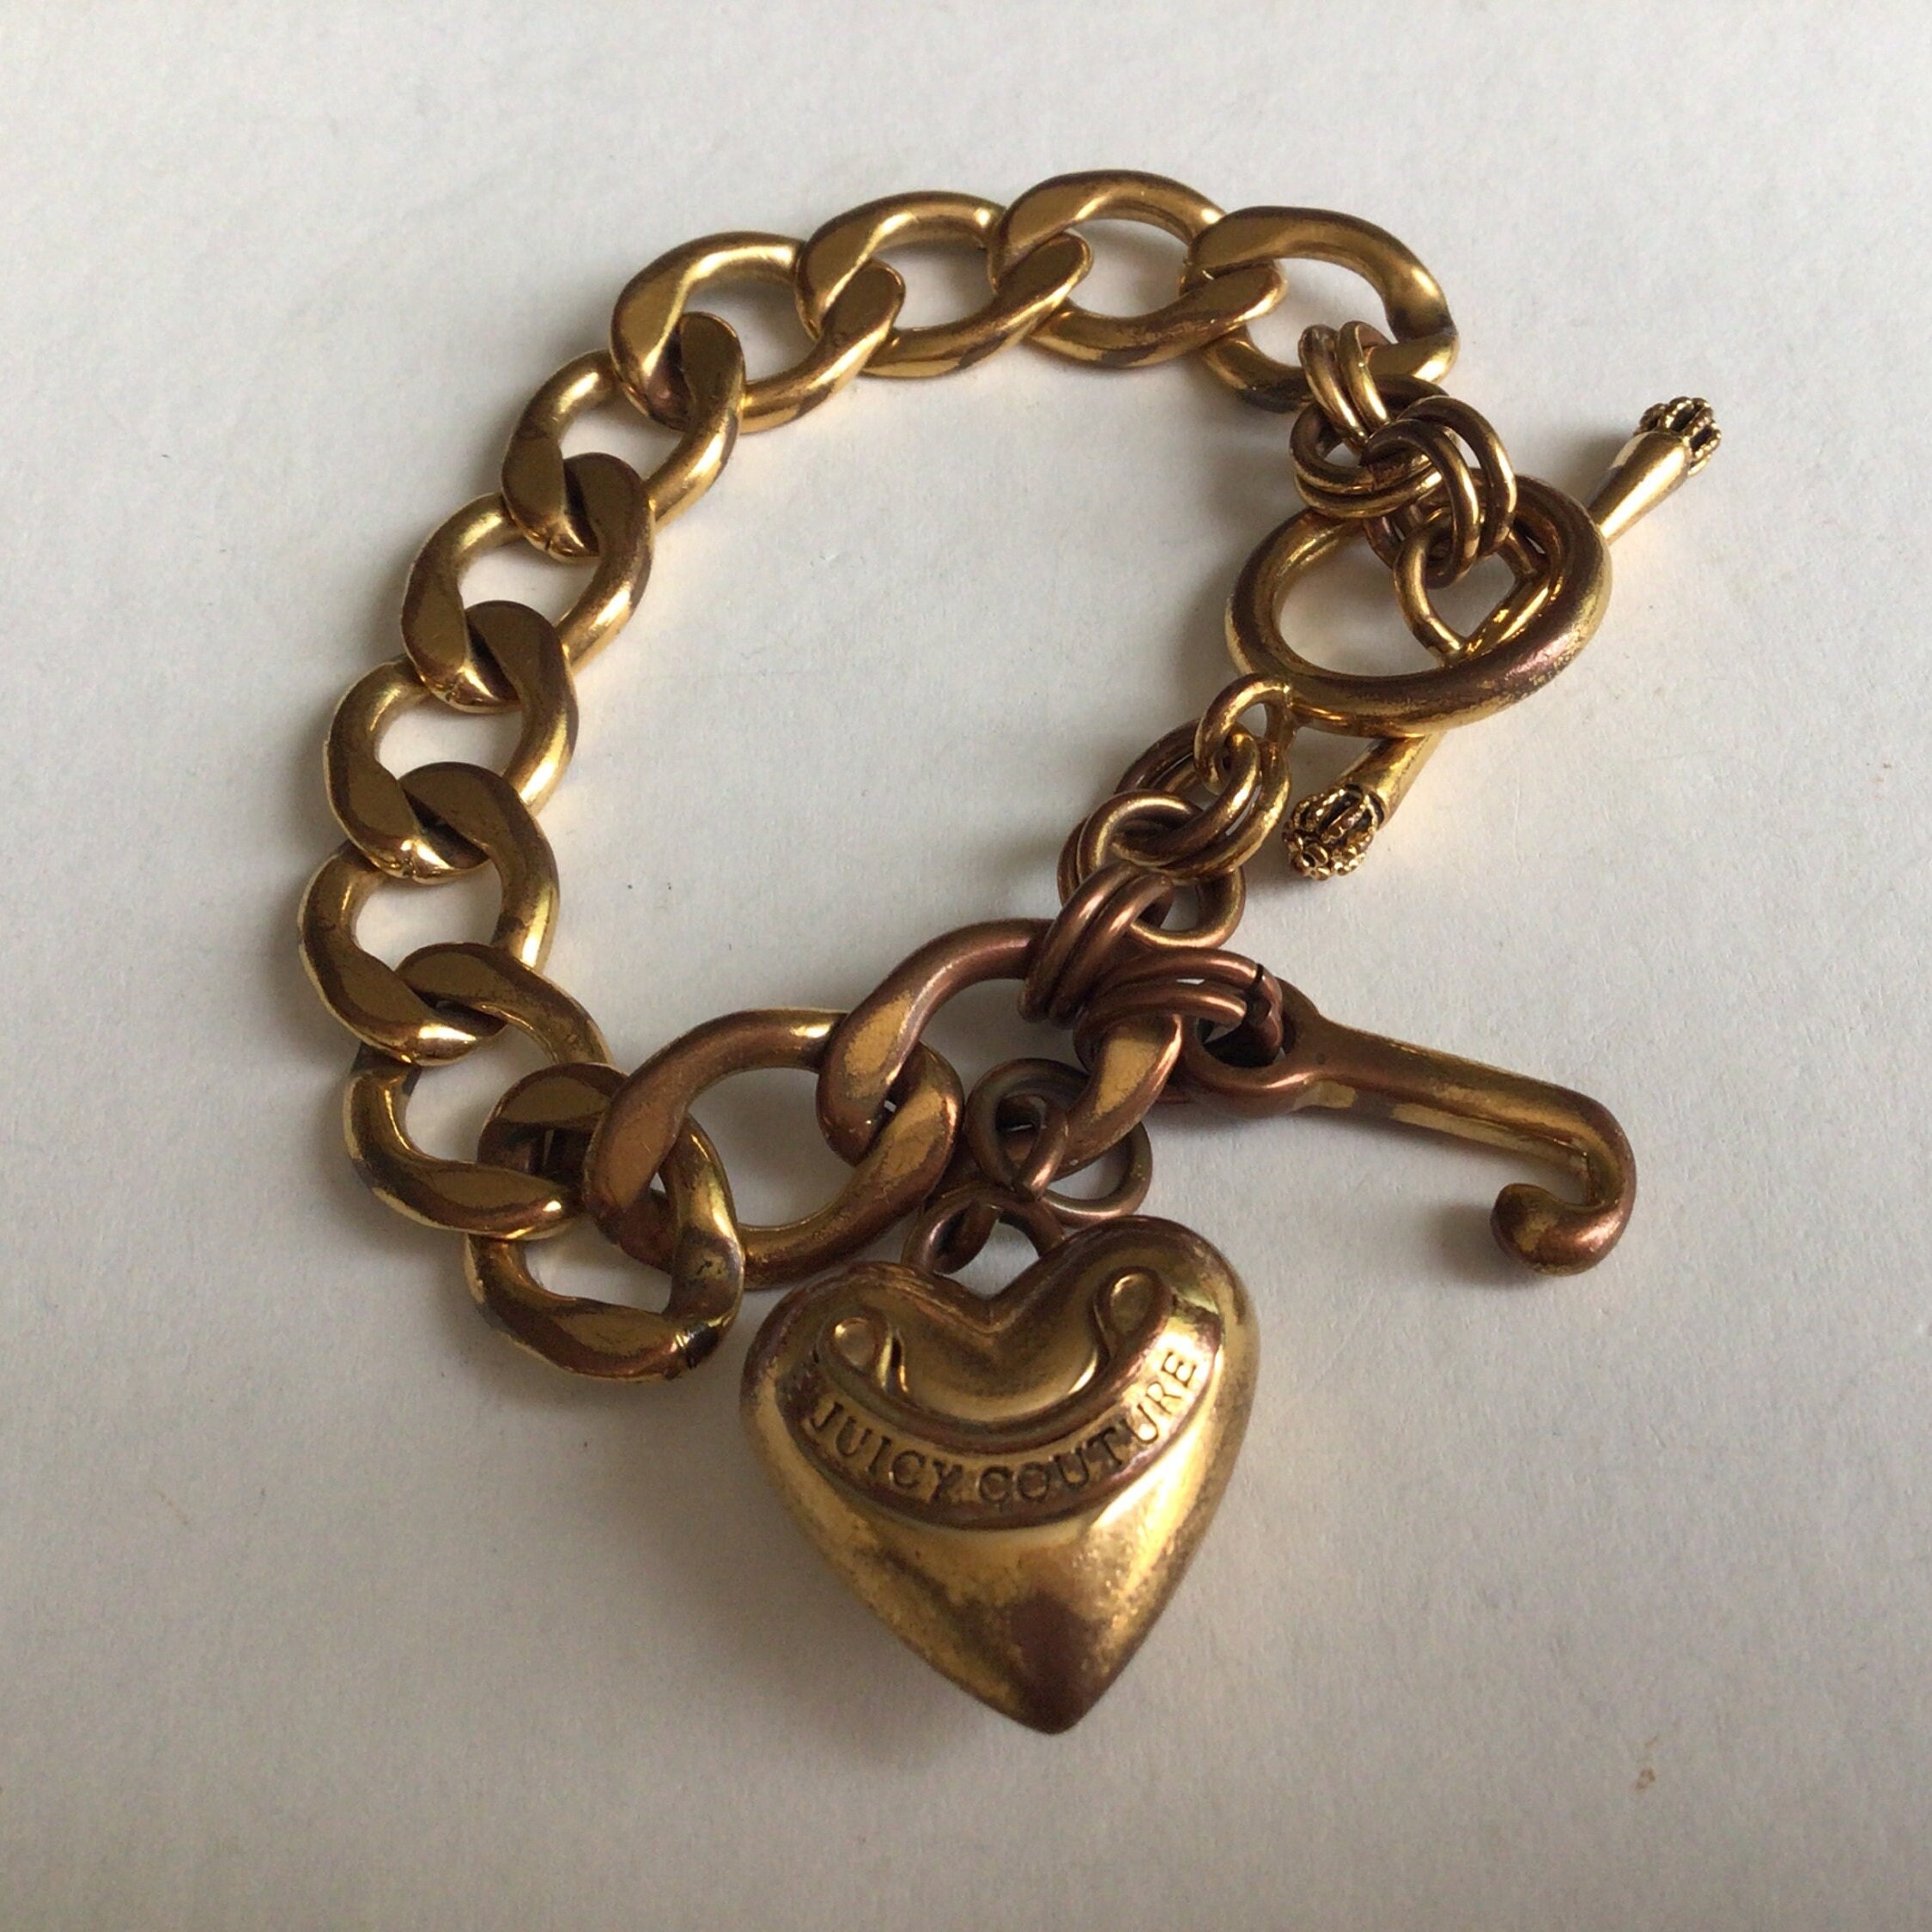 Juicy Couture Charms -  Canada